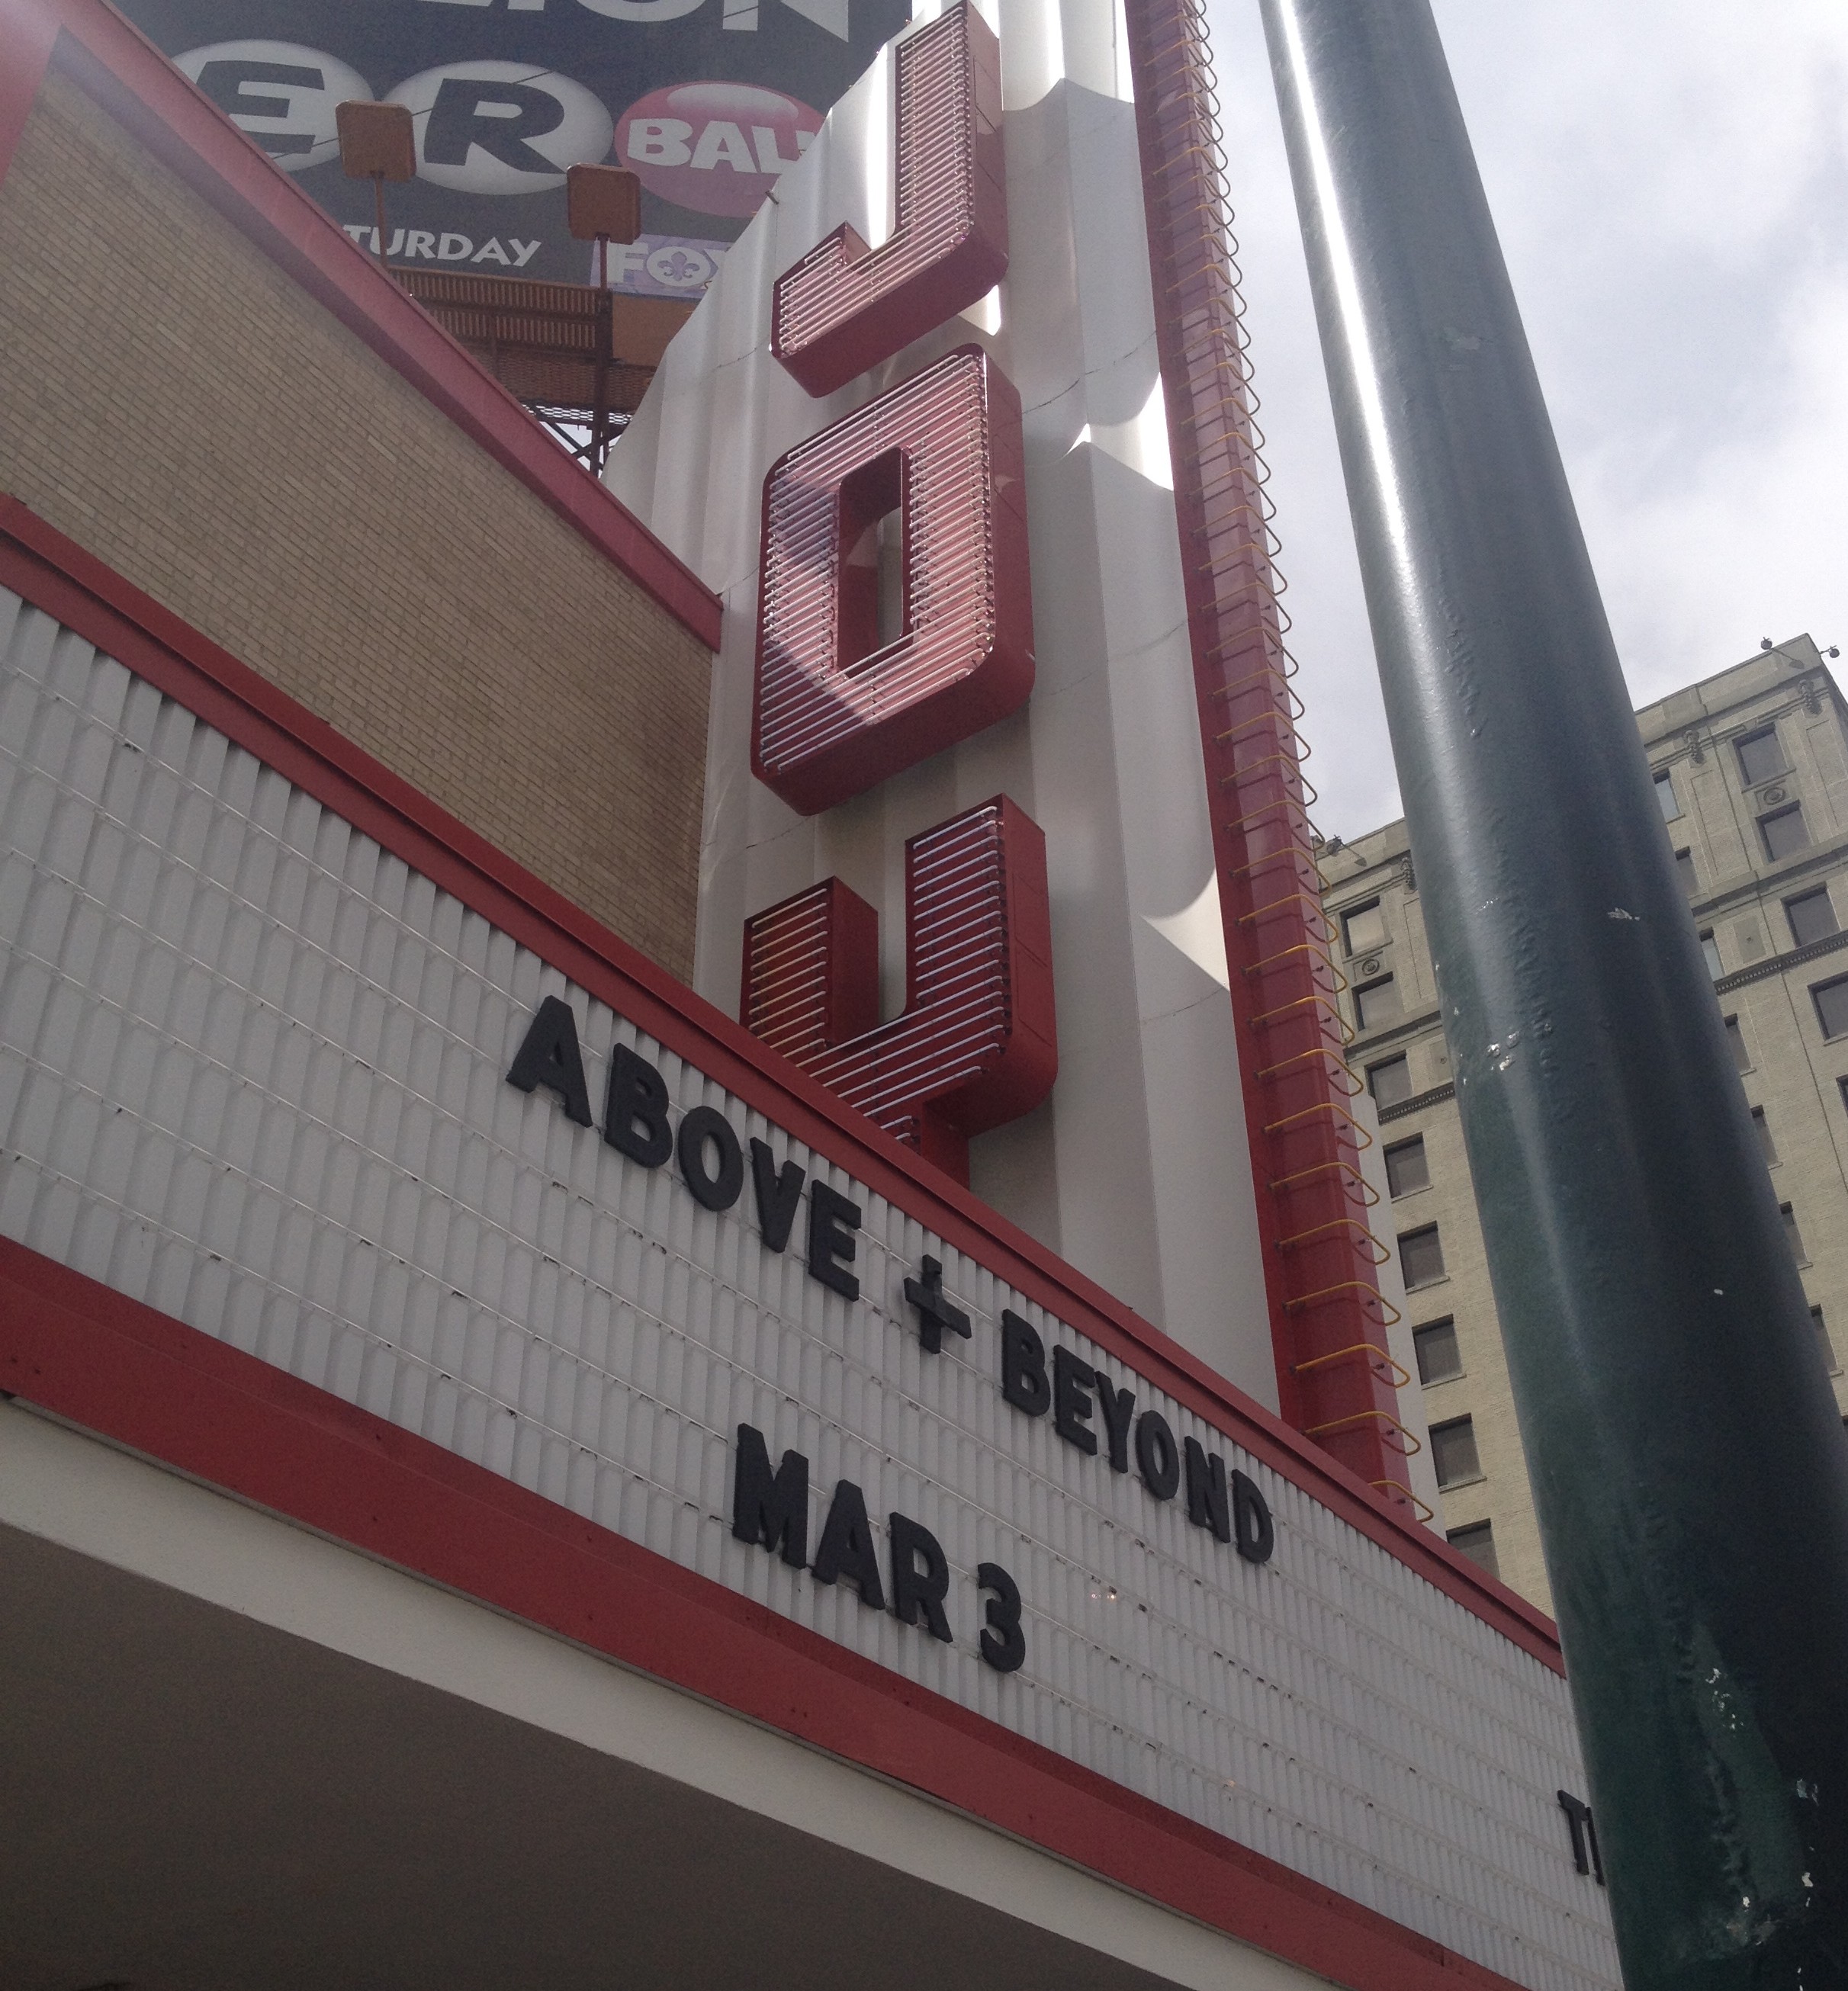 Above and Beyond on the marquee for the Joy Theater